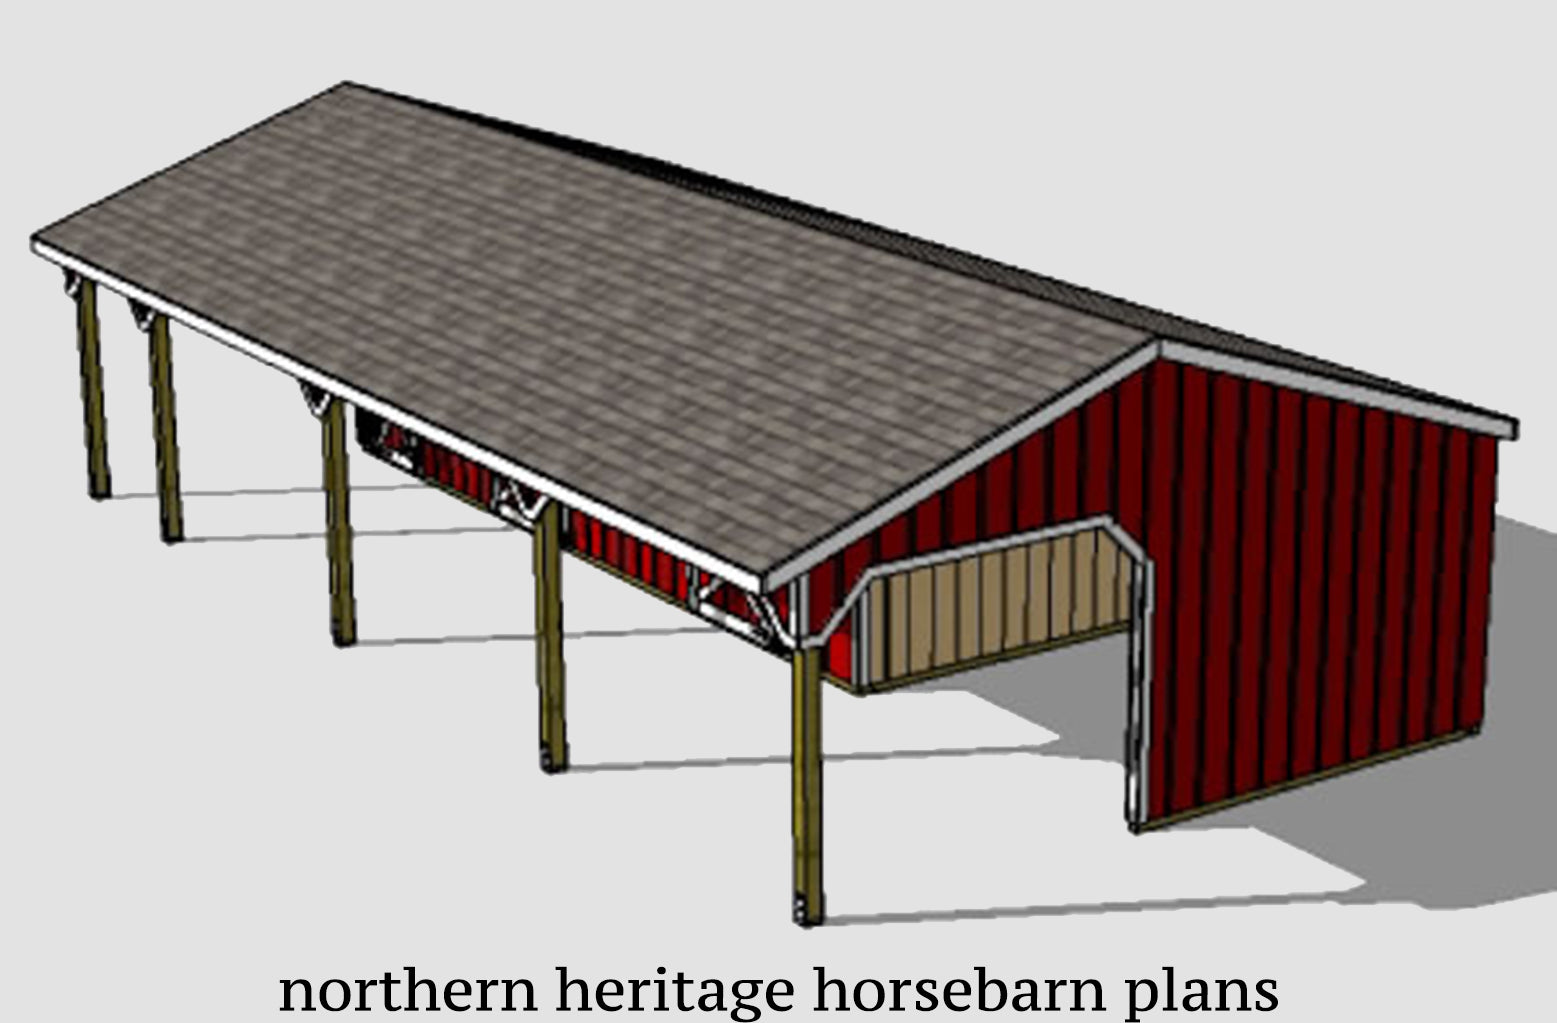 22x42 Horse Barn Plan With Added Tack Room Attached Run In Barn Opti Northern Heritage Horsebarn Plans